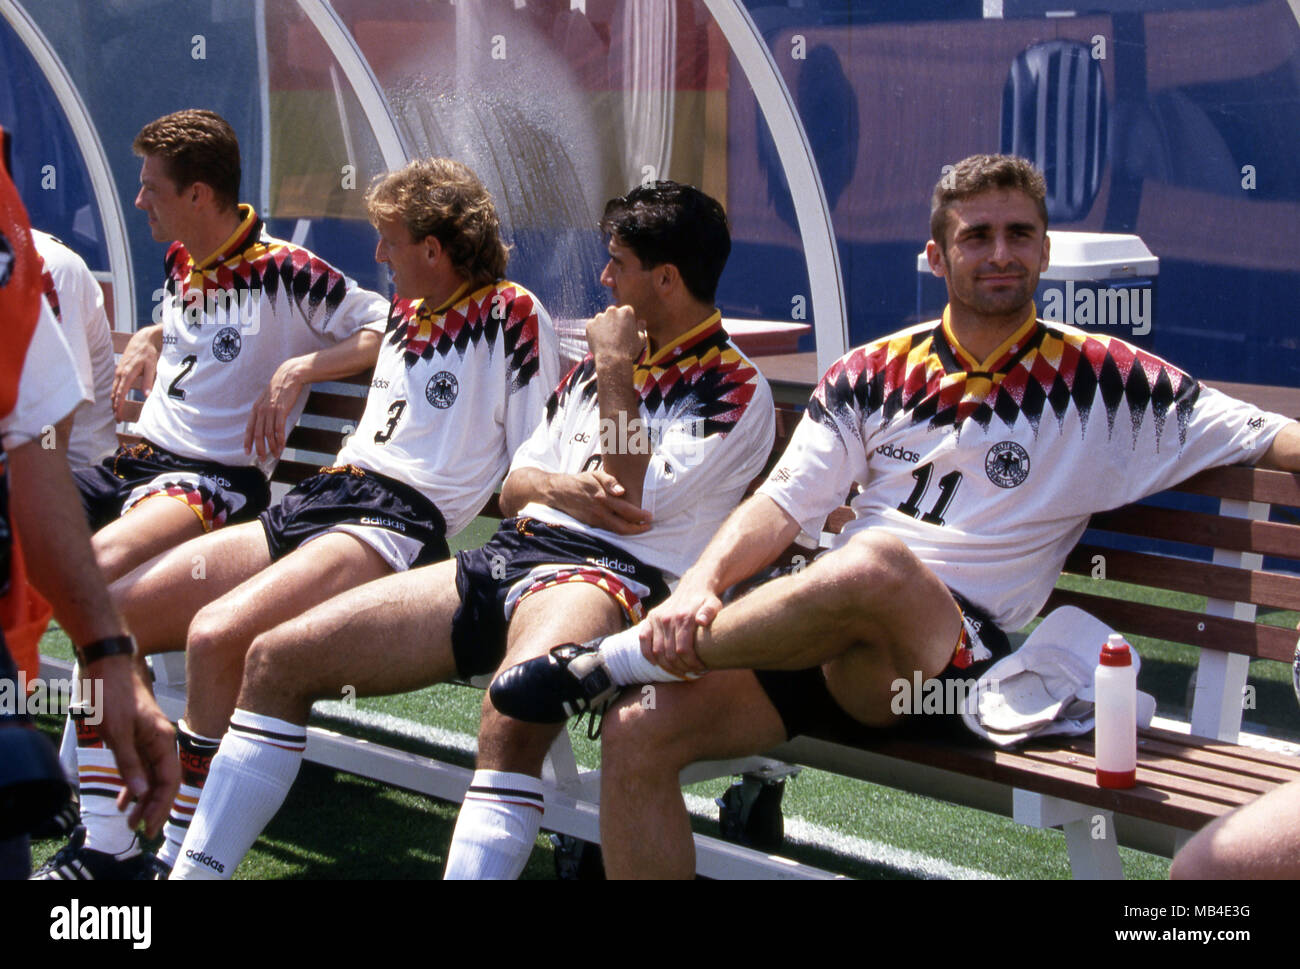 FIFA World Cup - USA 1994 10.7.1994, Giants Stadium, New York/New Jersey. World Cup Quarter Final, Bulgaria v Germany. German substitutes on the bench before the match, from left Thomas Strunz, Andreas Brehme, Karlheinz Riedle & Stefan Kuntz. Stock Photo